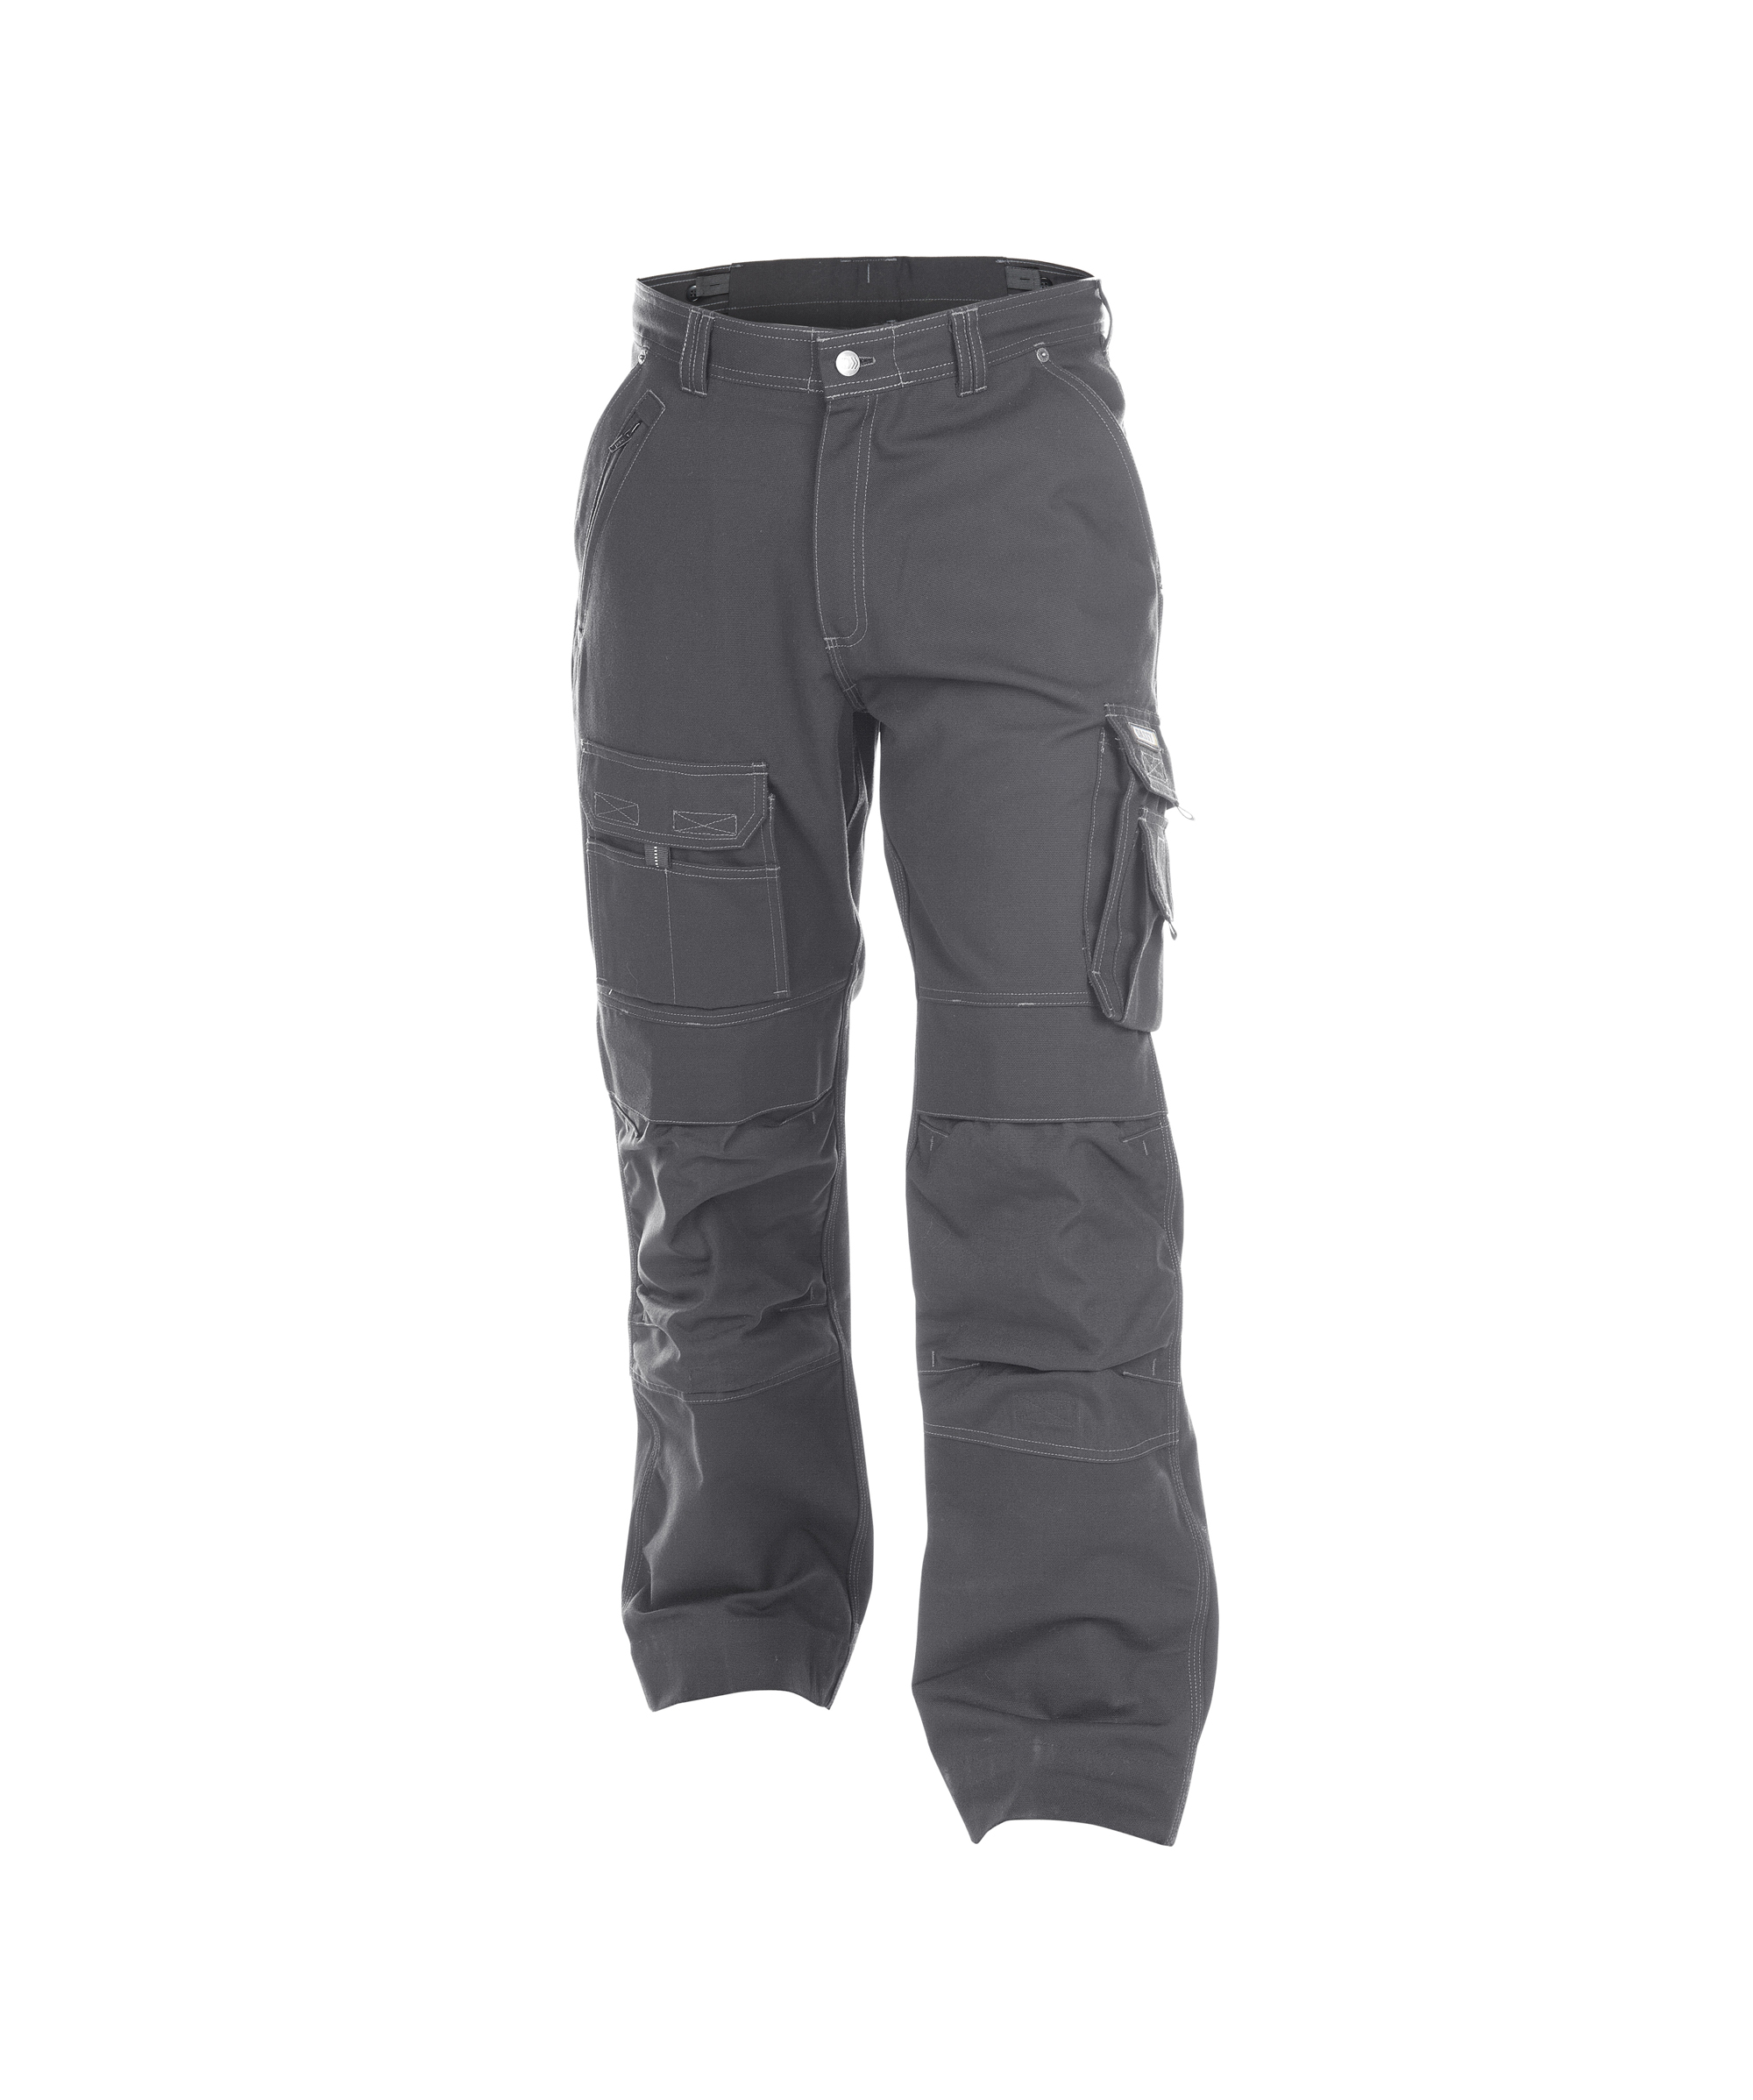 jackson_canvas-work-trousers-with-knee-pockets_cement-grey_front.jpg